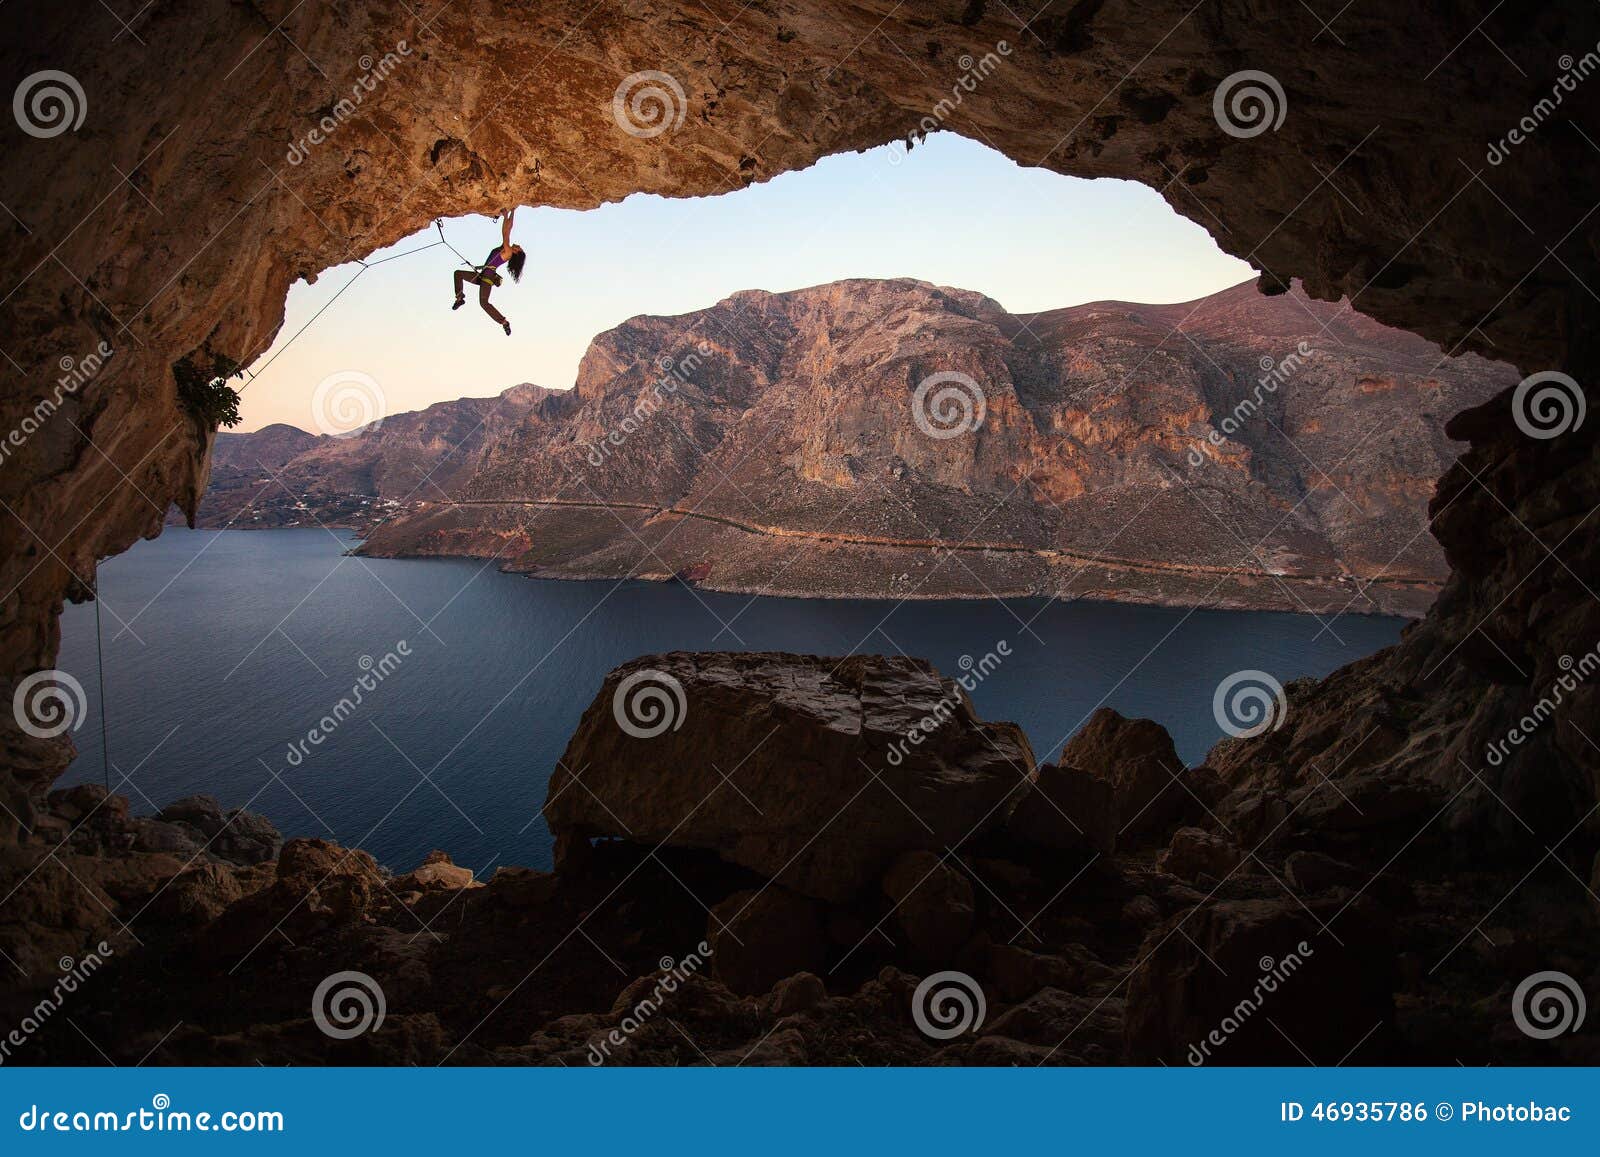 silhouette of female rock climber on cliff in cave